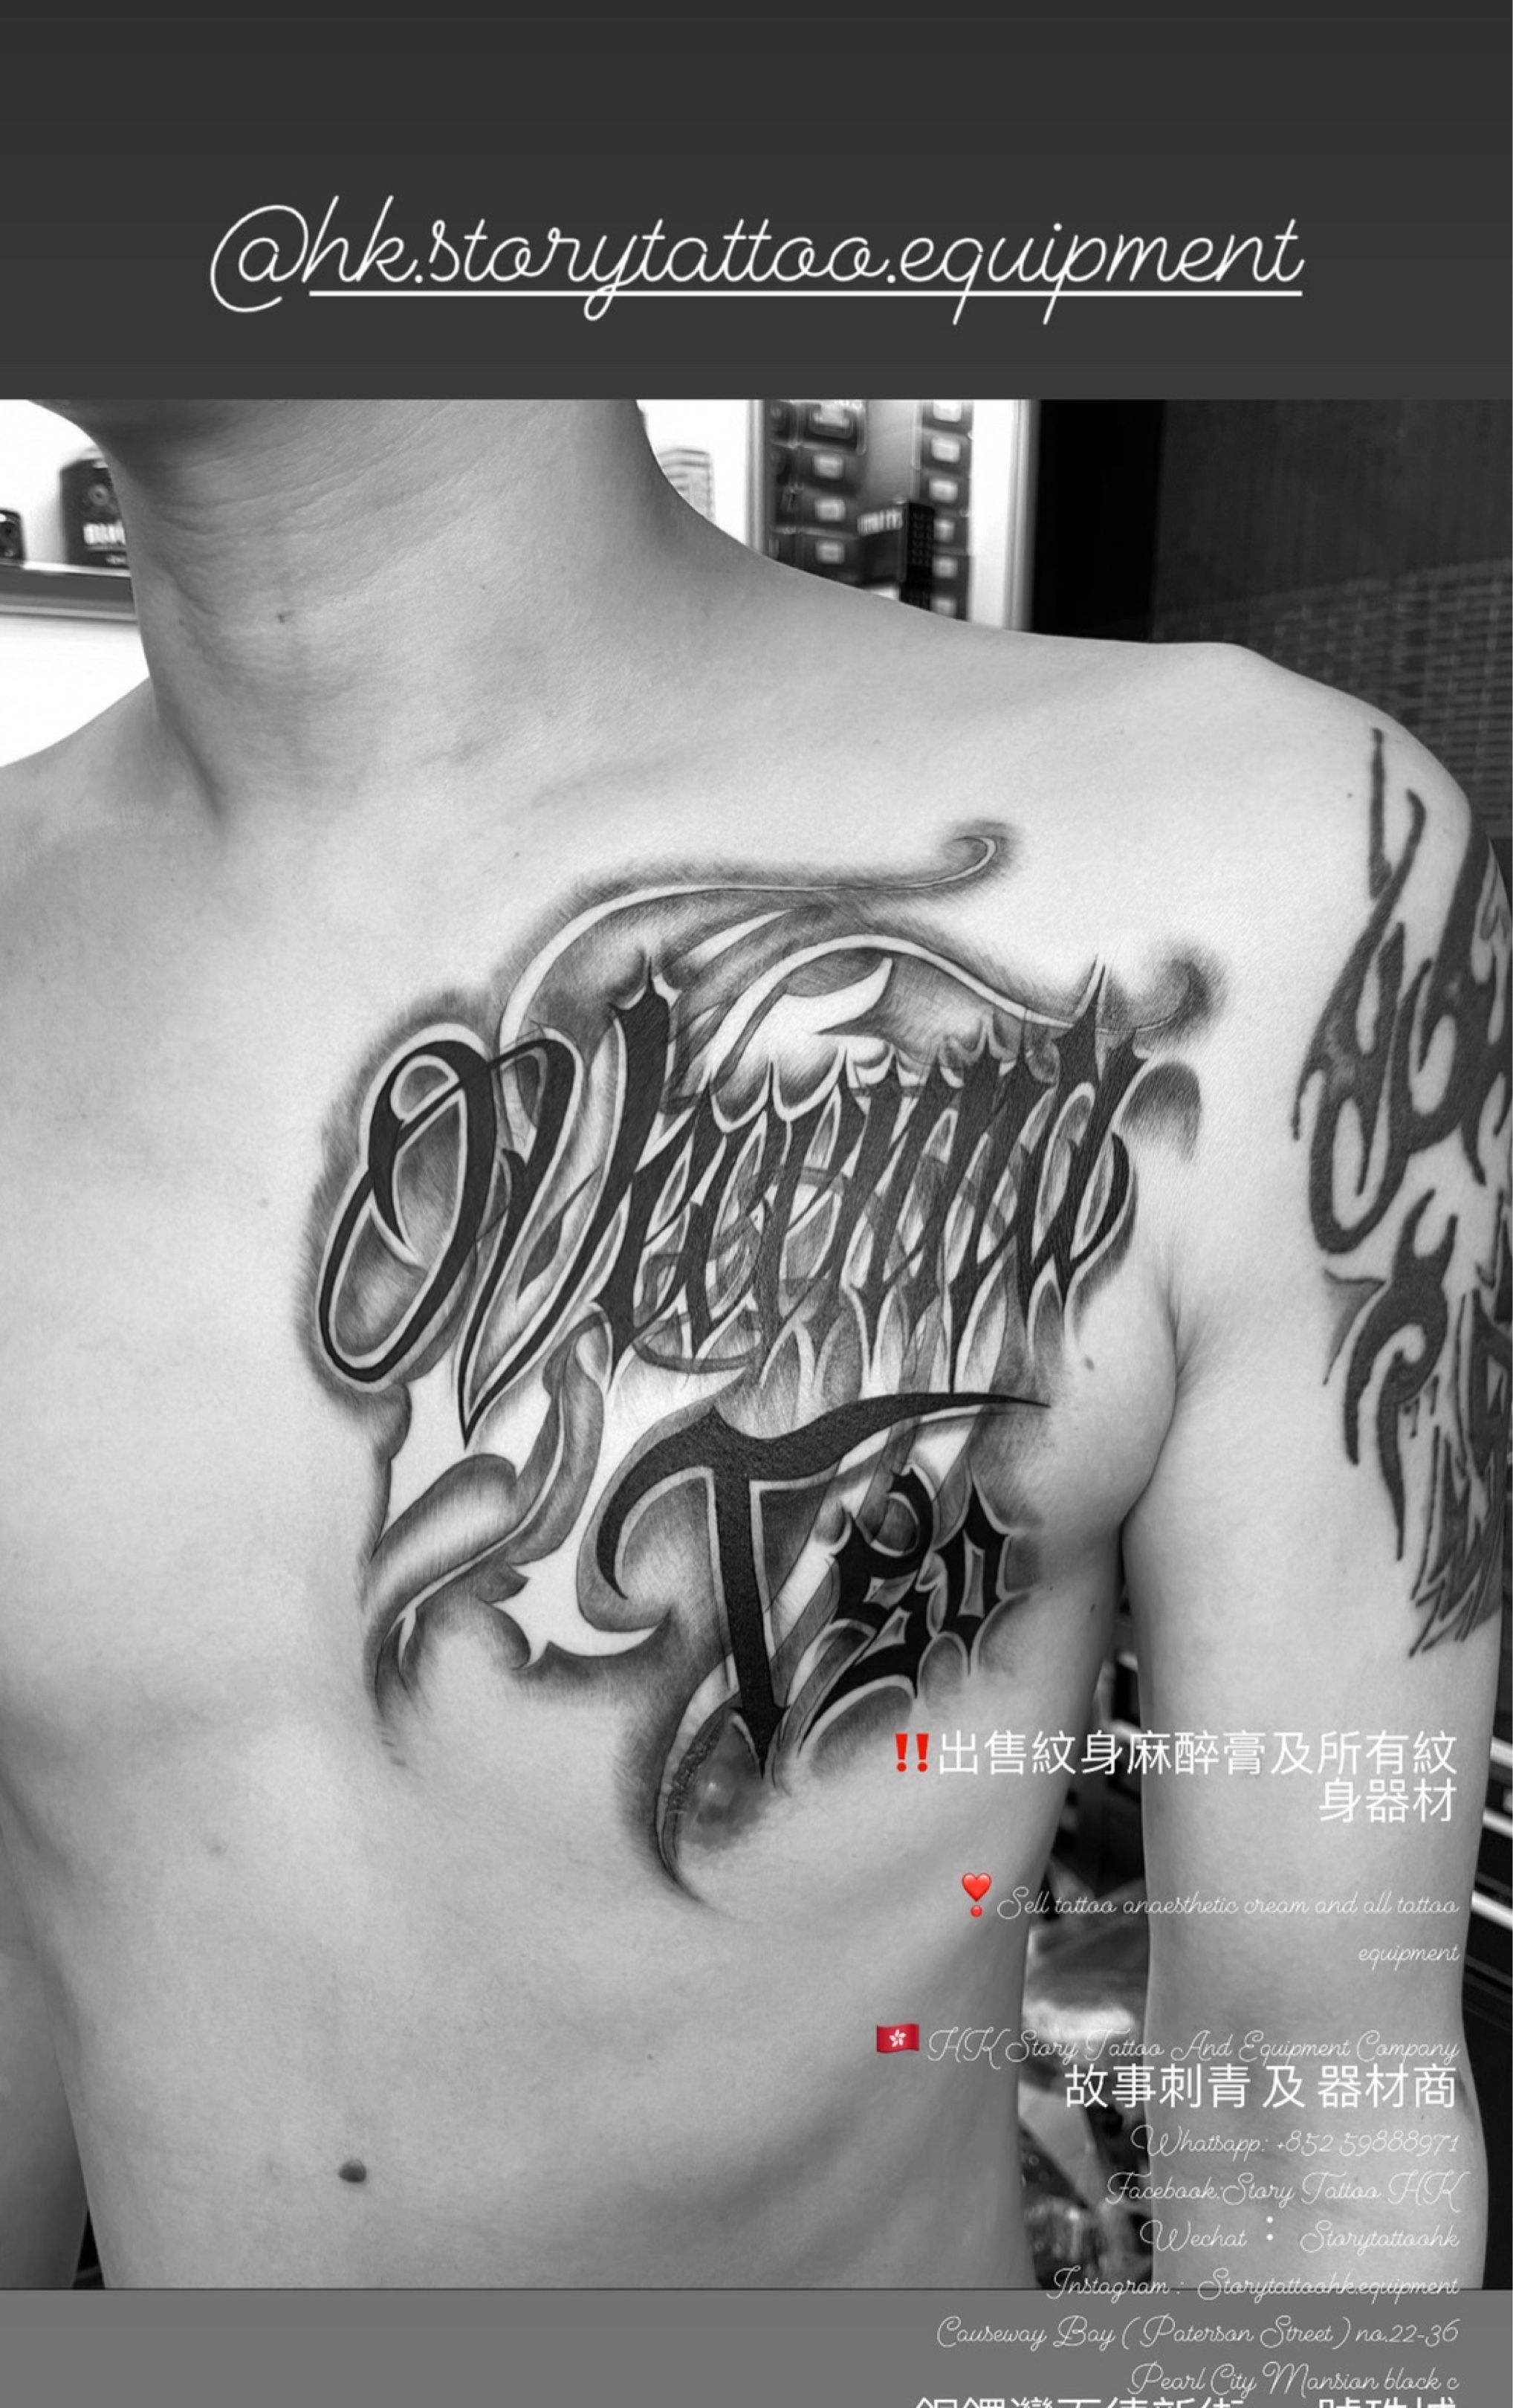 Tyga Put Under General Anesthetic For Massive Back Tattoo | HipHopDX